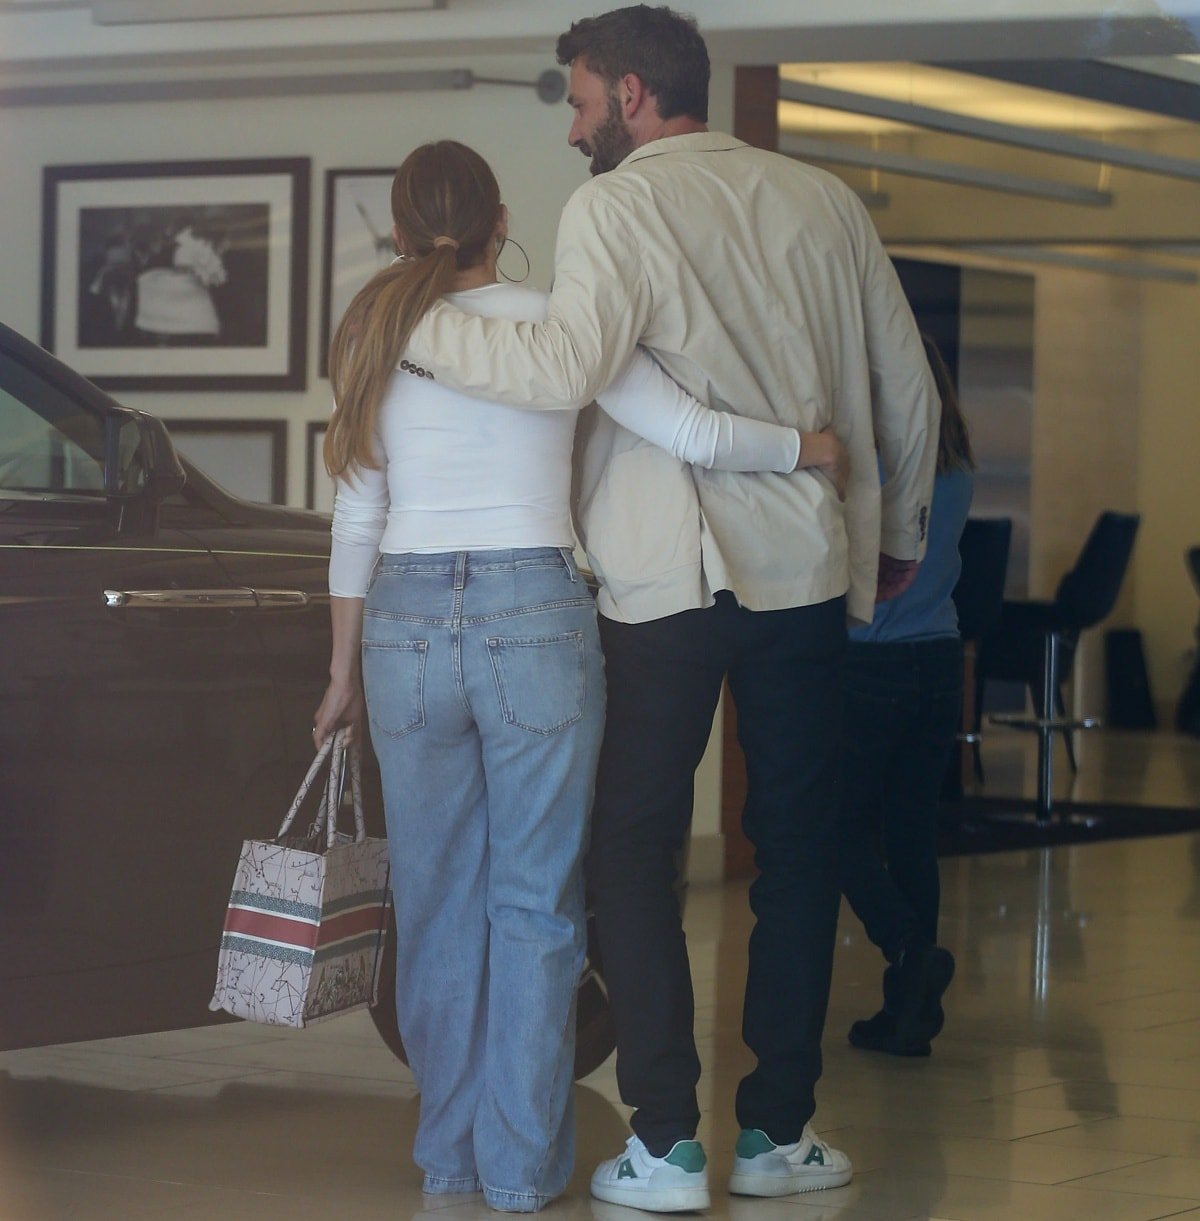 Ben Affleck wrapped his arm around his fiancée Jennifer Lopez as they looked around the Rolls Royce dealership in Los Angeles